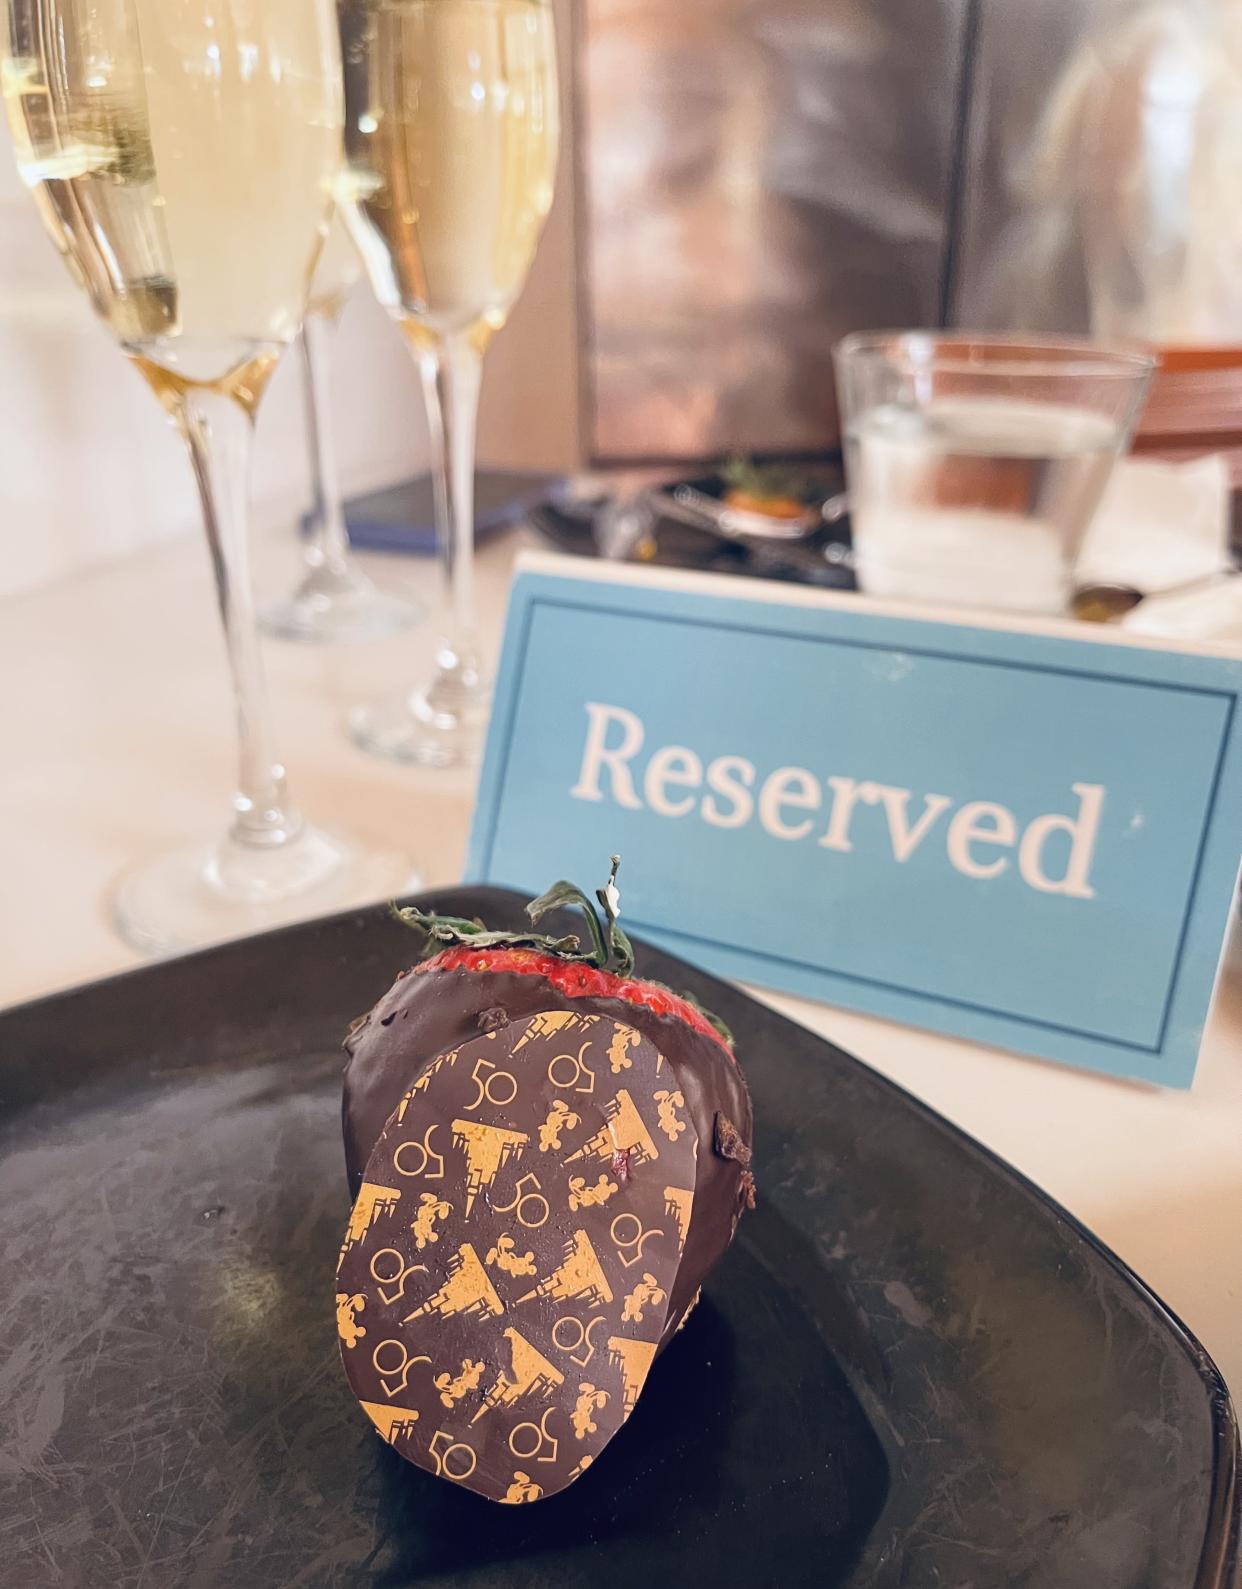 Walt Disney World's dessert parties can be pricey, making them a perfect option for Disney adults, who don't have children to buy tickets for. (Photo: Carly Caramanna)